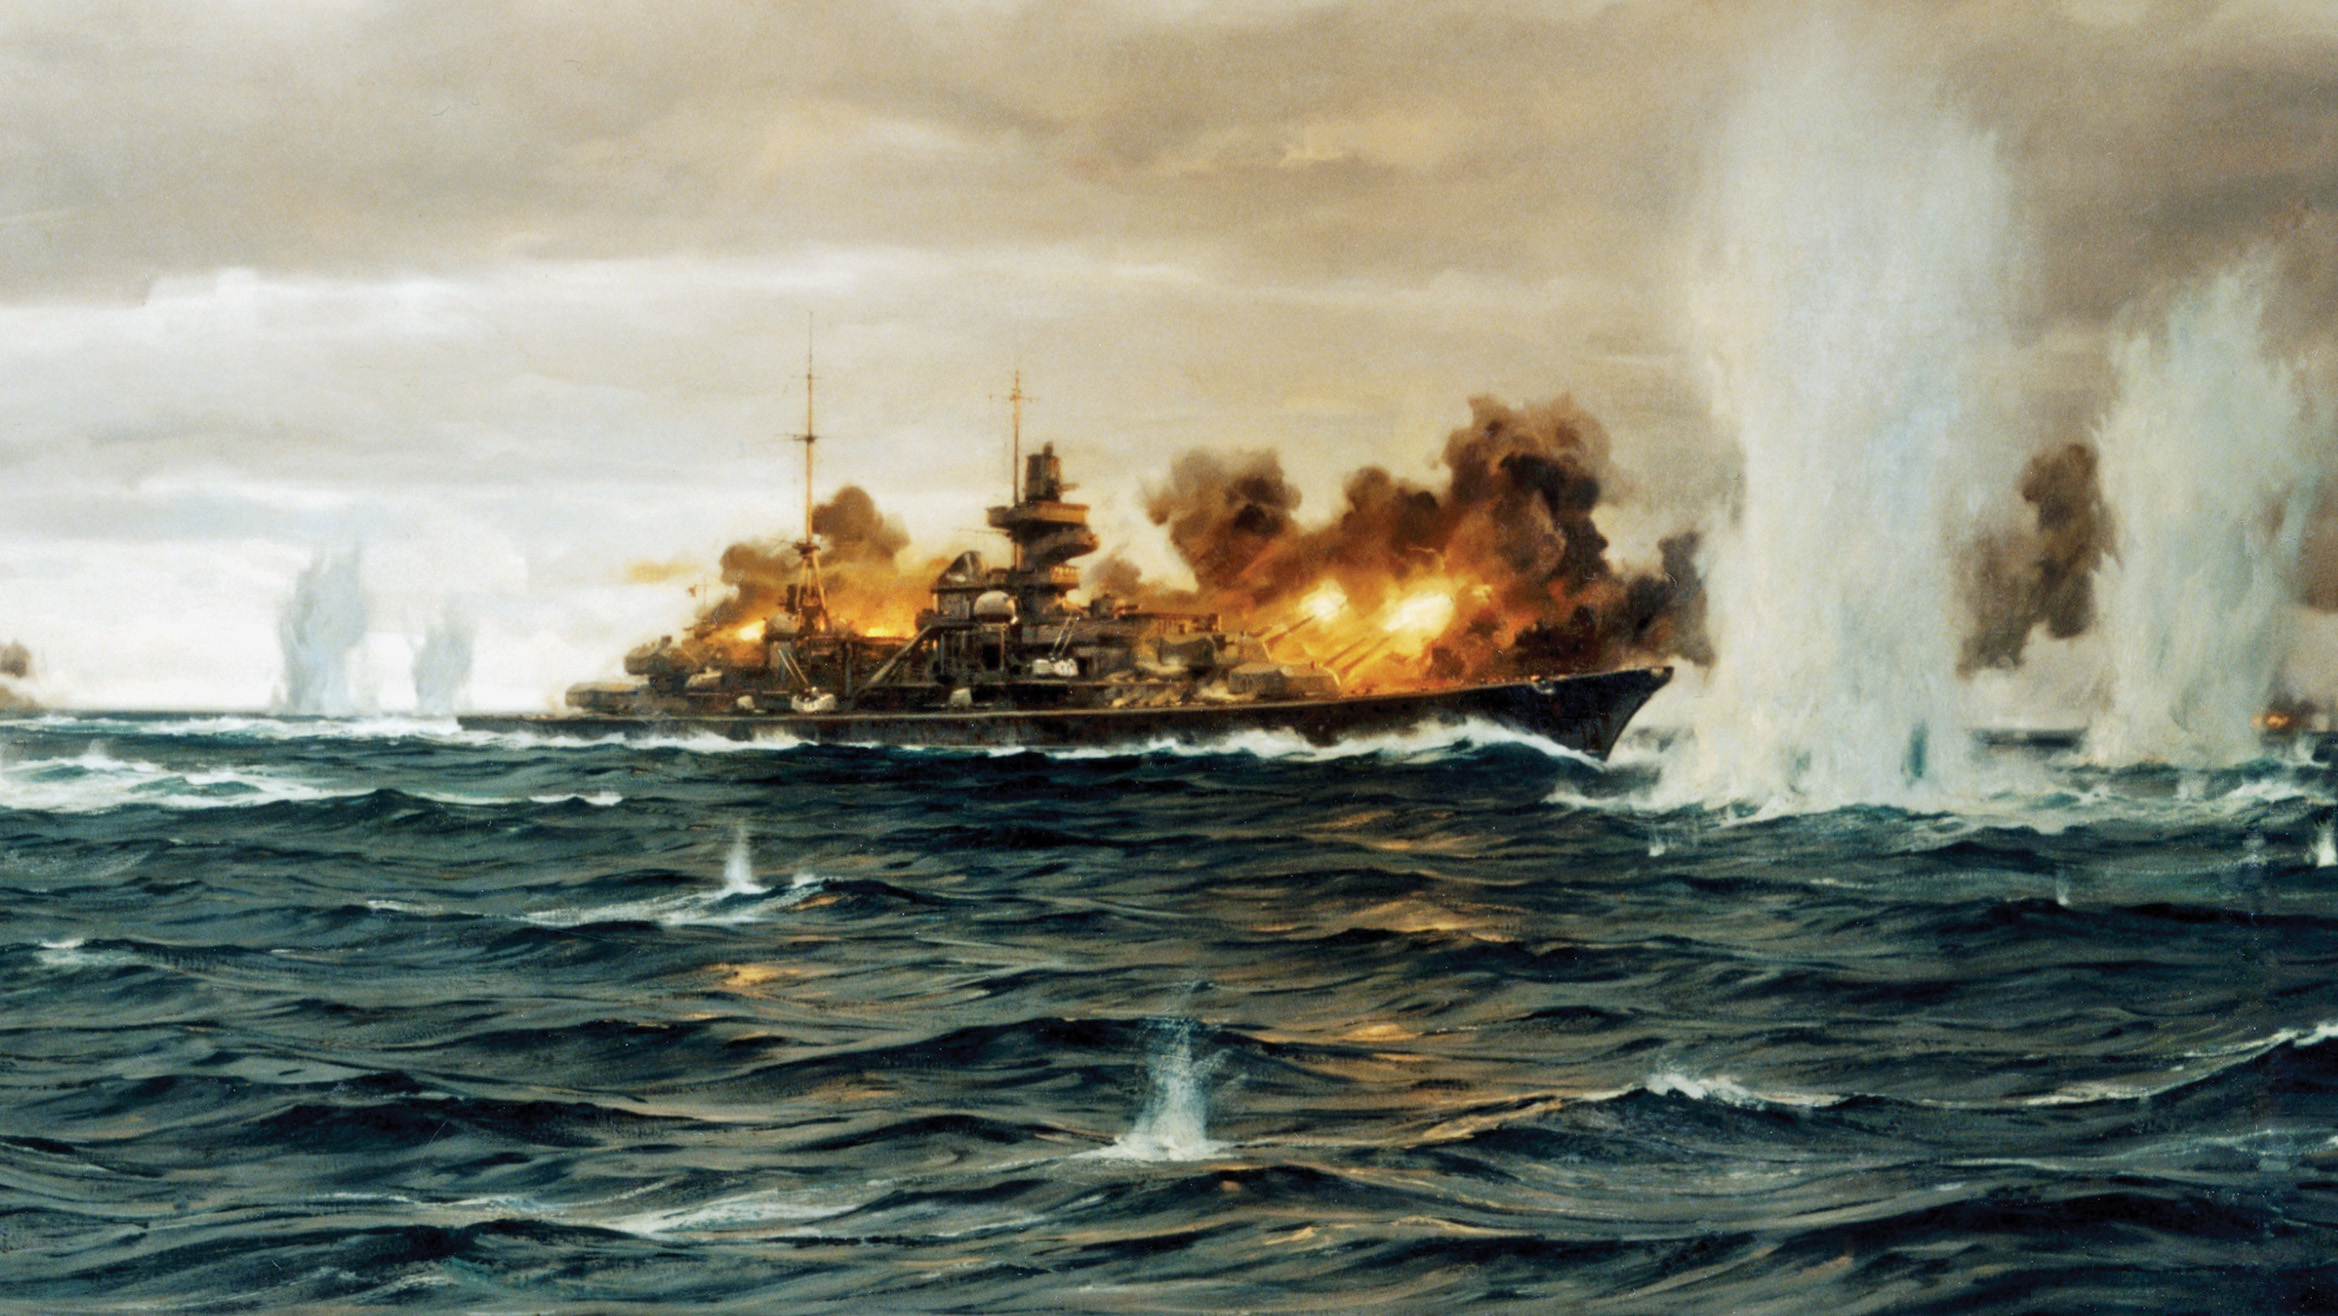 An artist's depiction of the German battleships Bismarck and Prinz Eugen firing on battlecruiser HMS Hood and battleship Prince of Wales during the Battle of Denmark Strait, May 23, 1941. Both British ships were hit and Hood was sunk but Prince of Wales, although damaged, survived for a few more months.